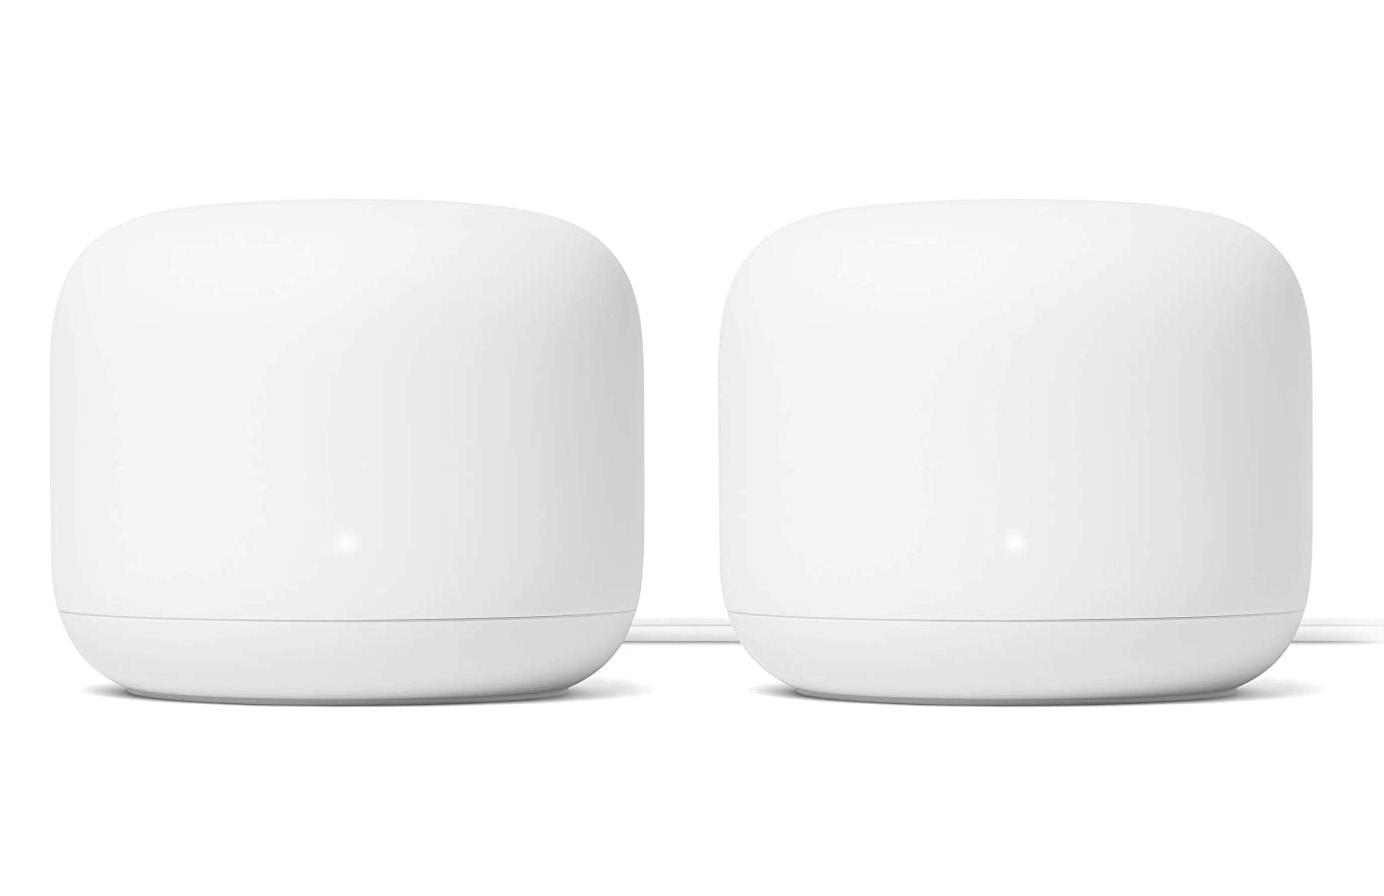 Google Nest Wifi Home Wifi System 2 Pack for $209 Shipped